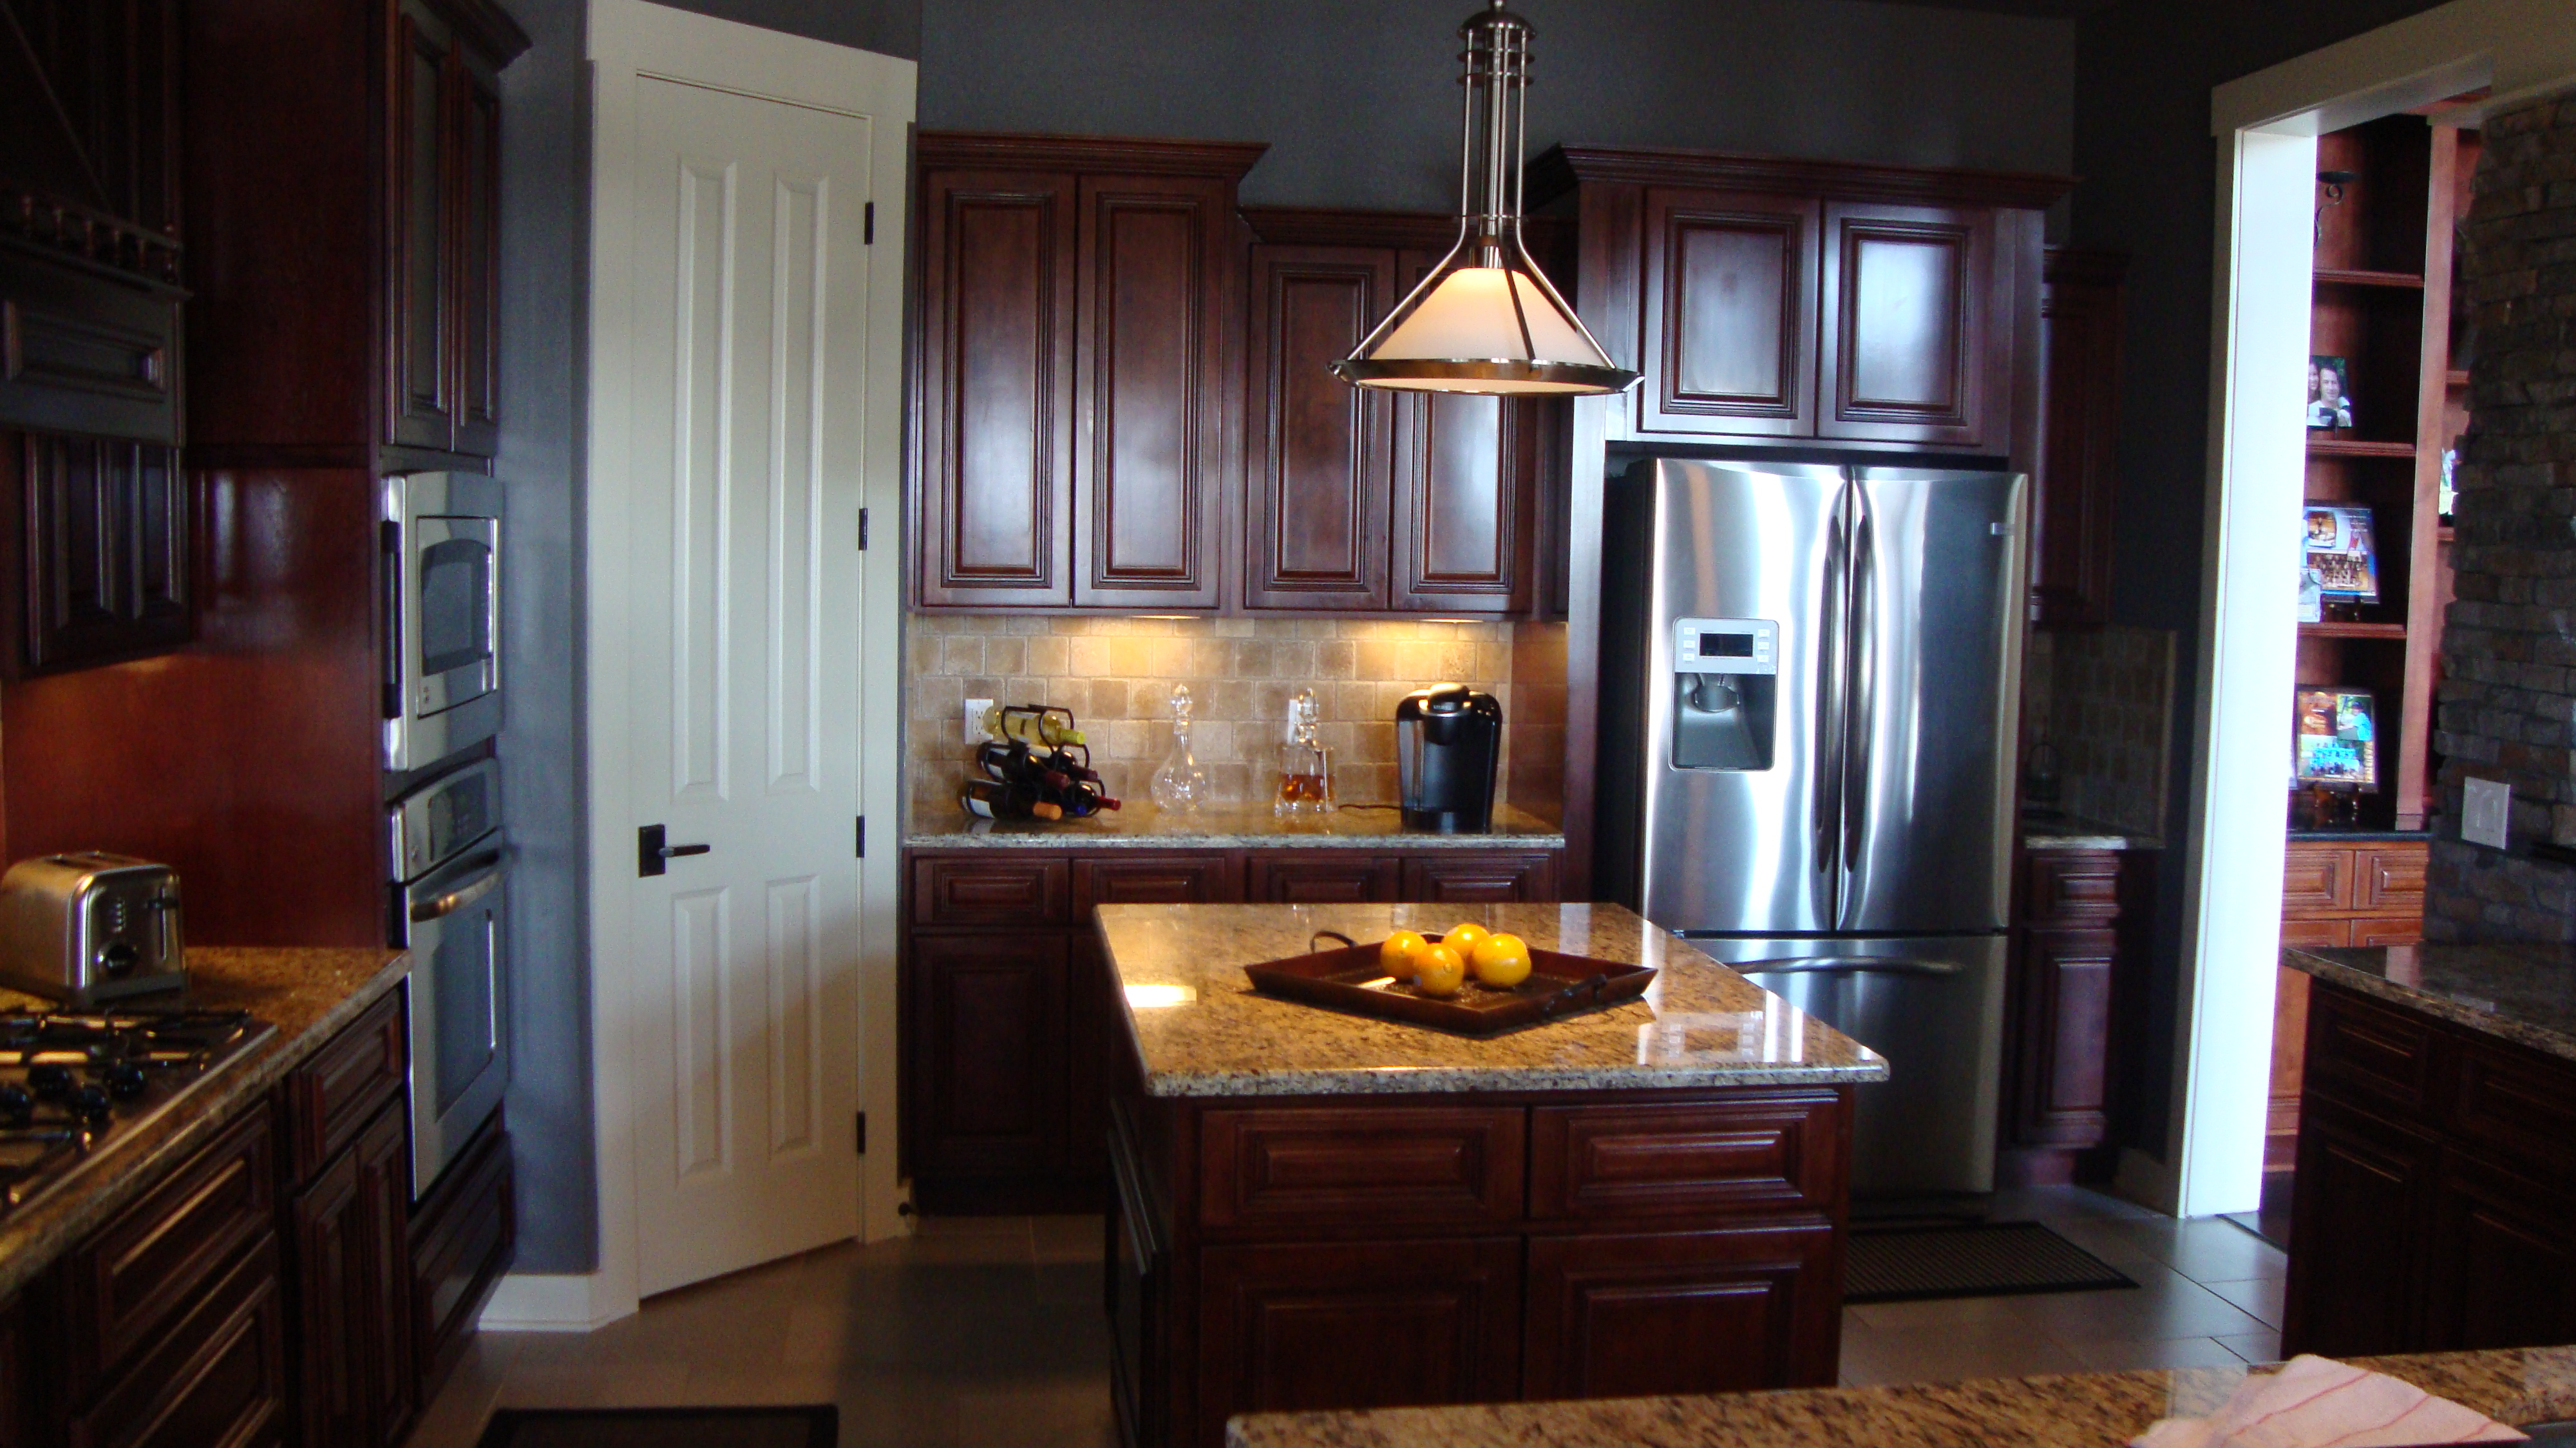 Contact Plumbline Legacy Cabinets